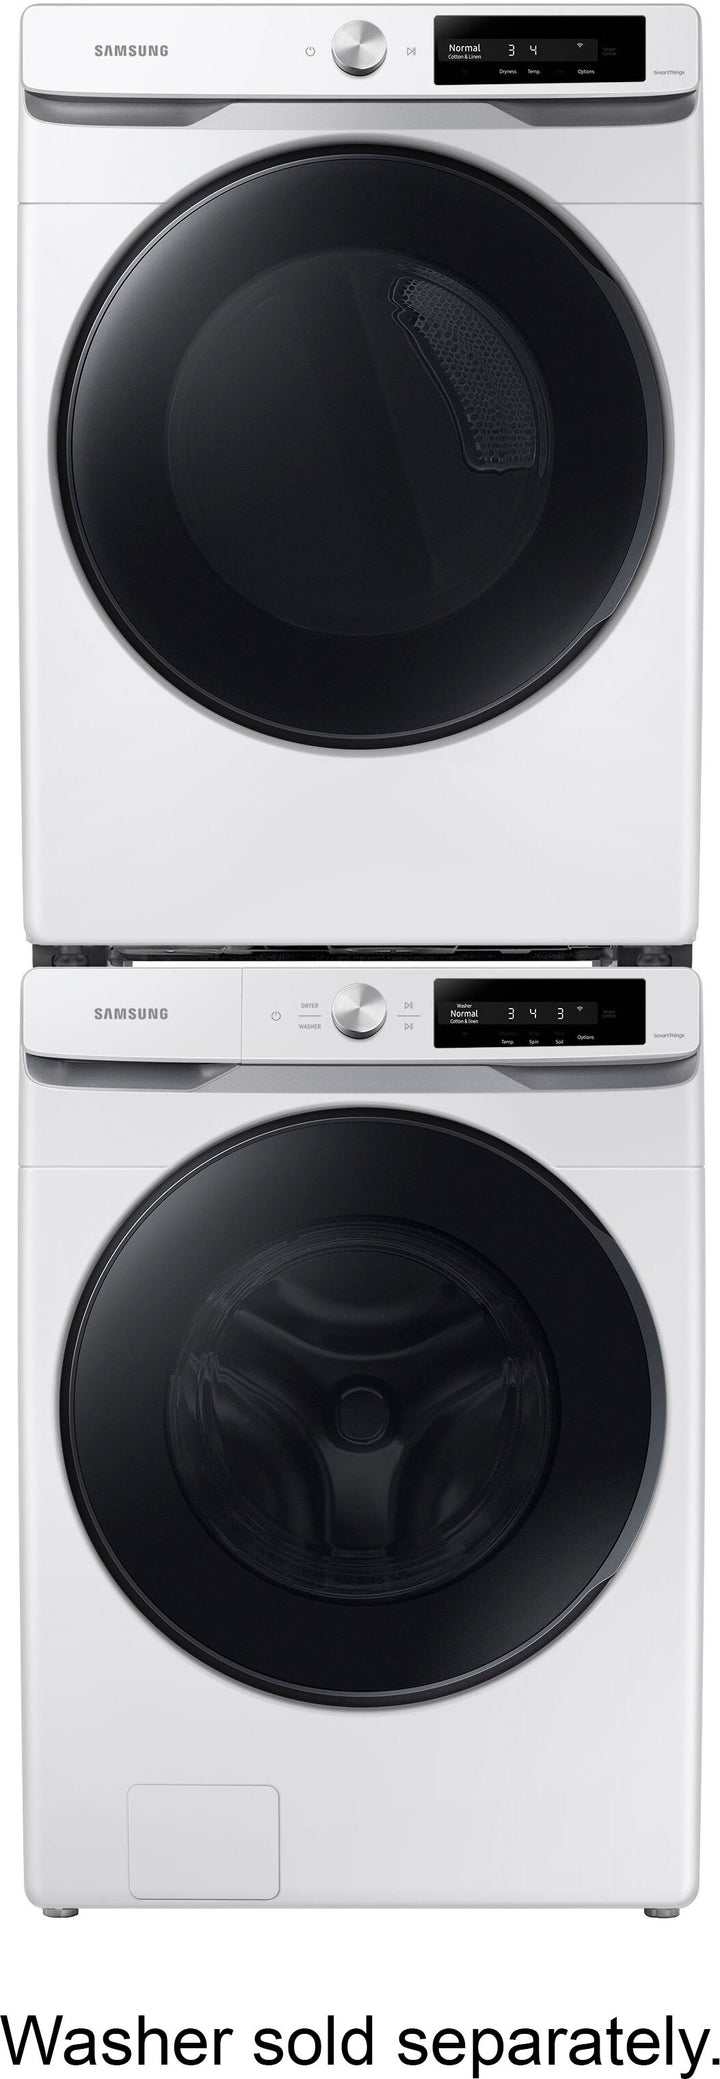 Samsung - 7.5 cu. ft. Smart Dial Gas Dryer with Super Speed Dry - White_12